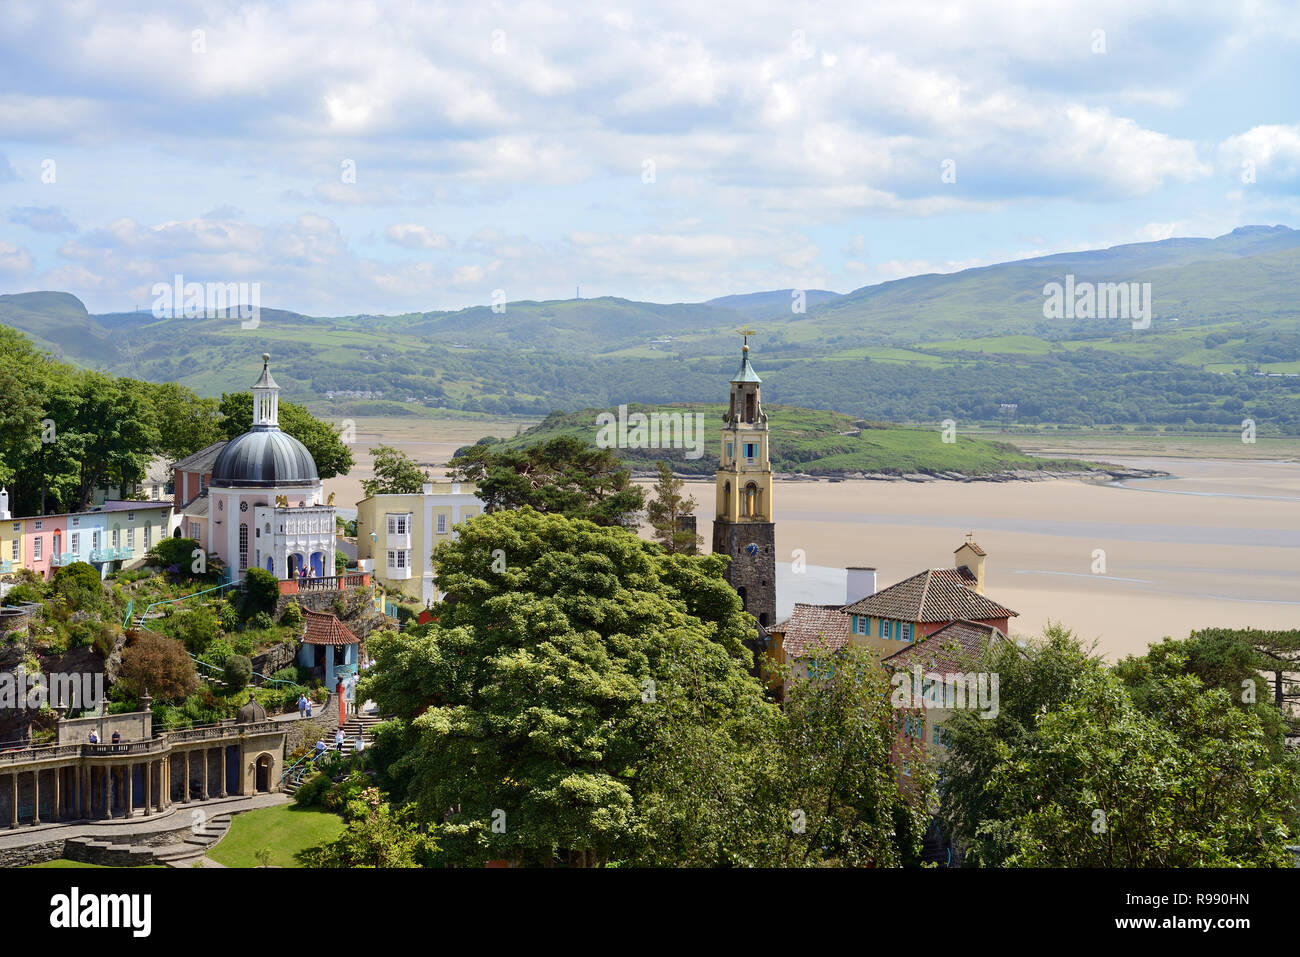 Portmeirion is a tourist village in North Wales styled in an Italian design by Sir Clough Williams-Ellis. It is now owned by a charitable trust. Stock Photo